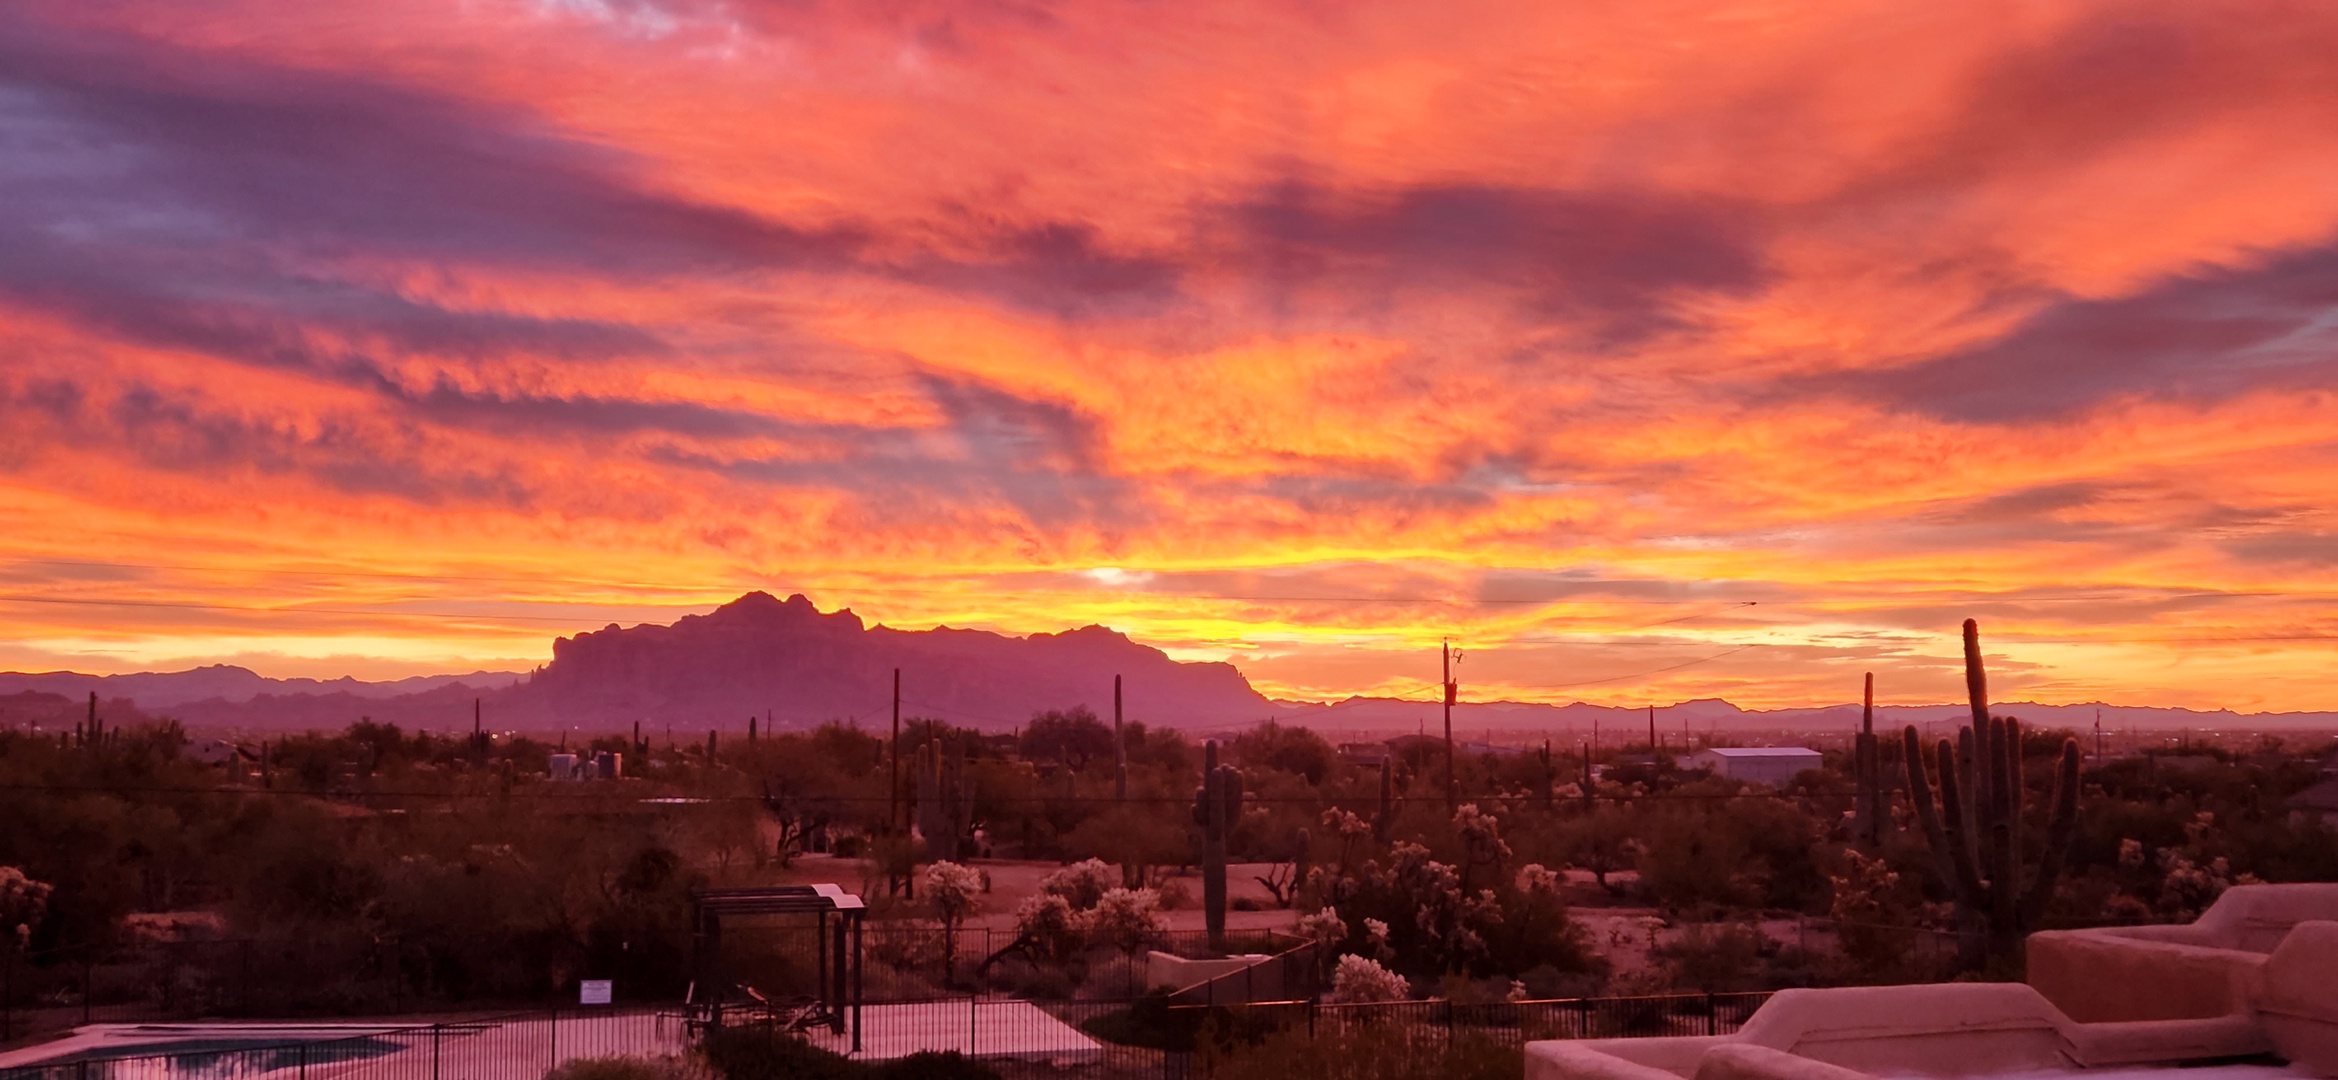 Enjoy impeccable sunsets at East Mesa Desert and Mountain Views!